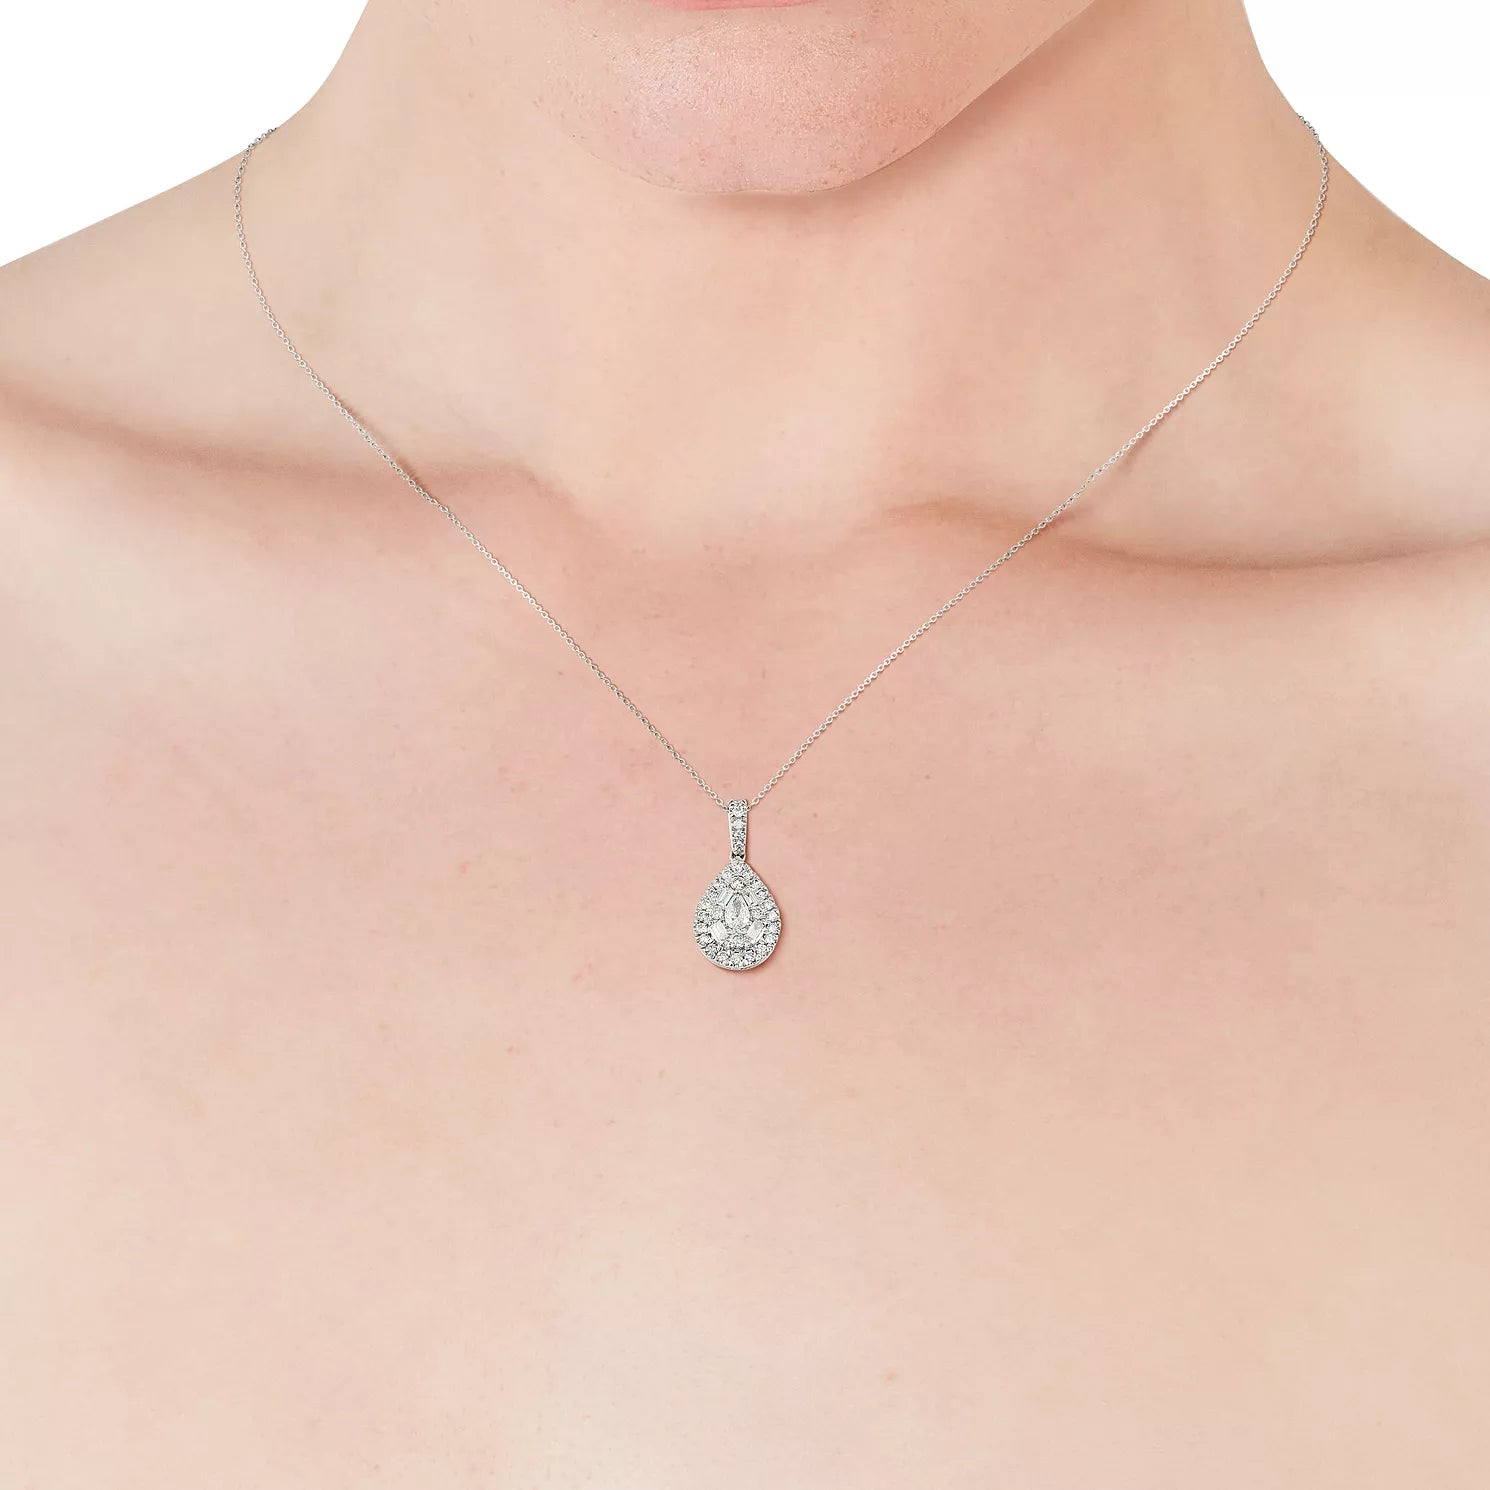 Water Drop 5 CT 925 Sterling Silver Moissanite Necklace